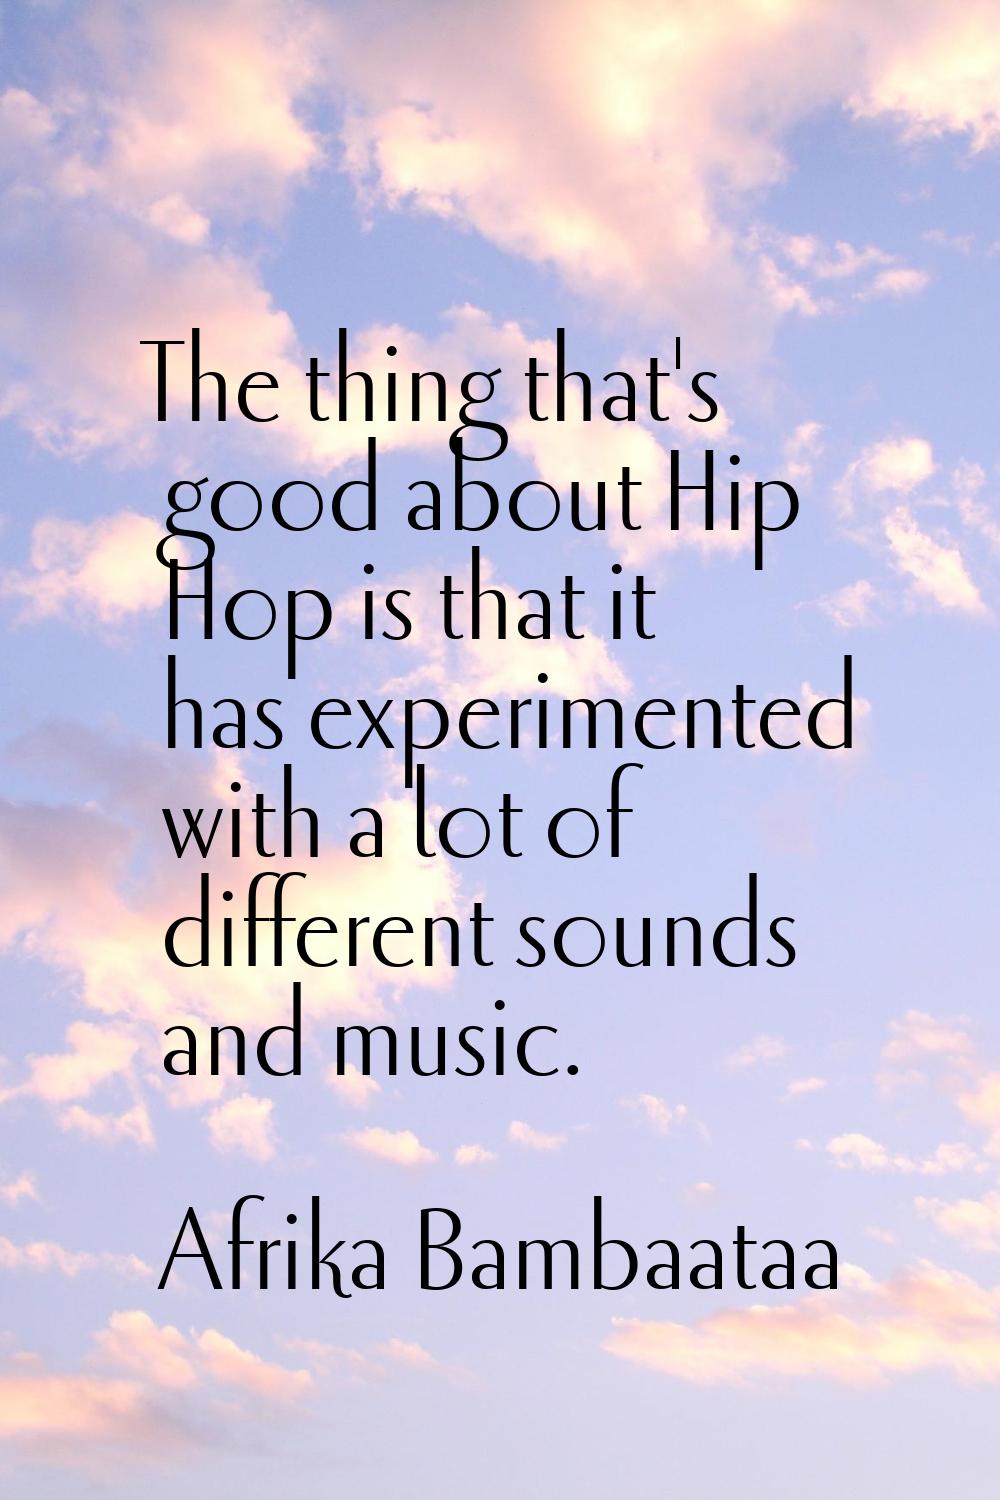 The thing that's good about Hip Hop is that it has experimented with a lot of different sounds and 